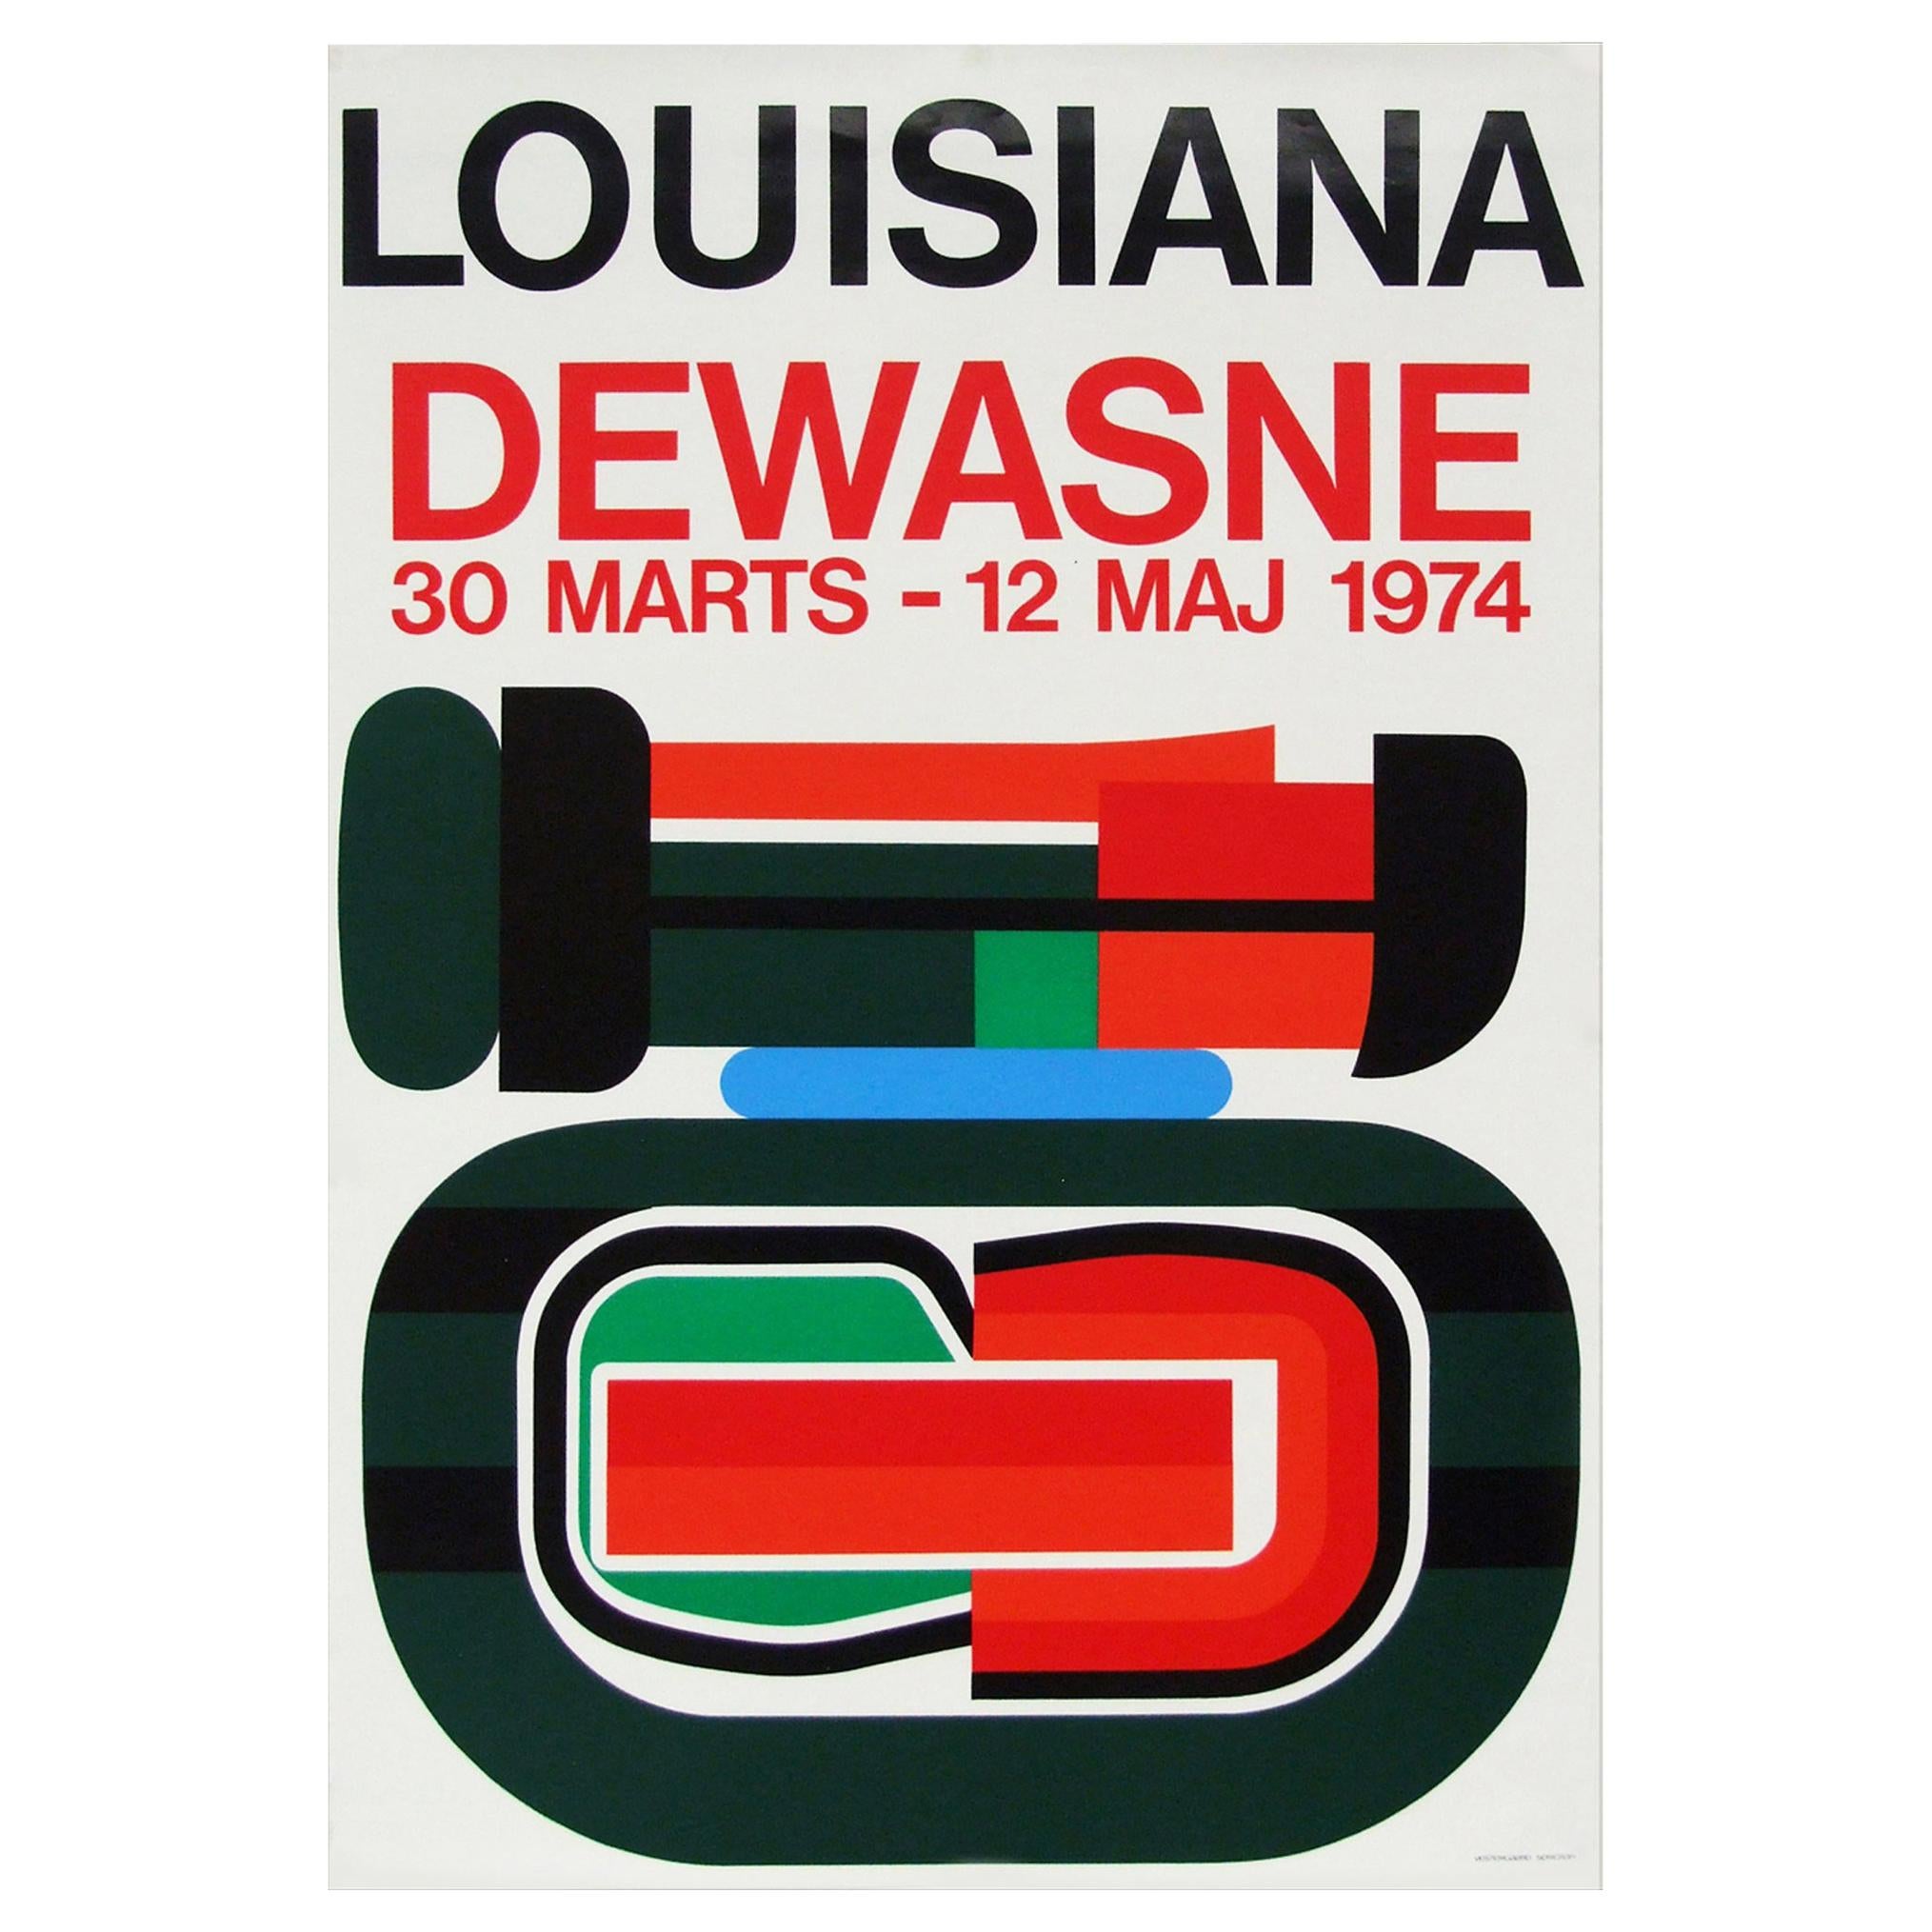 Original 1974 promotional poster for the Jean Dewasne exhibition at the Louisiana Museum, Denmark.

First edition color offset lithograph printed by Vestergaard Serigrafi

Rolled.

Measures: L 90cm x W 62cm.